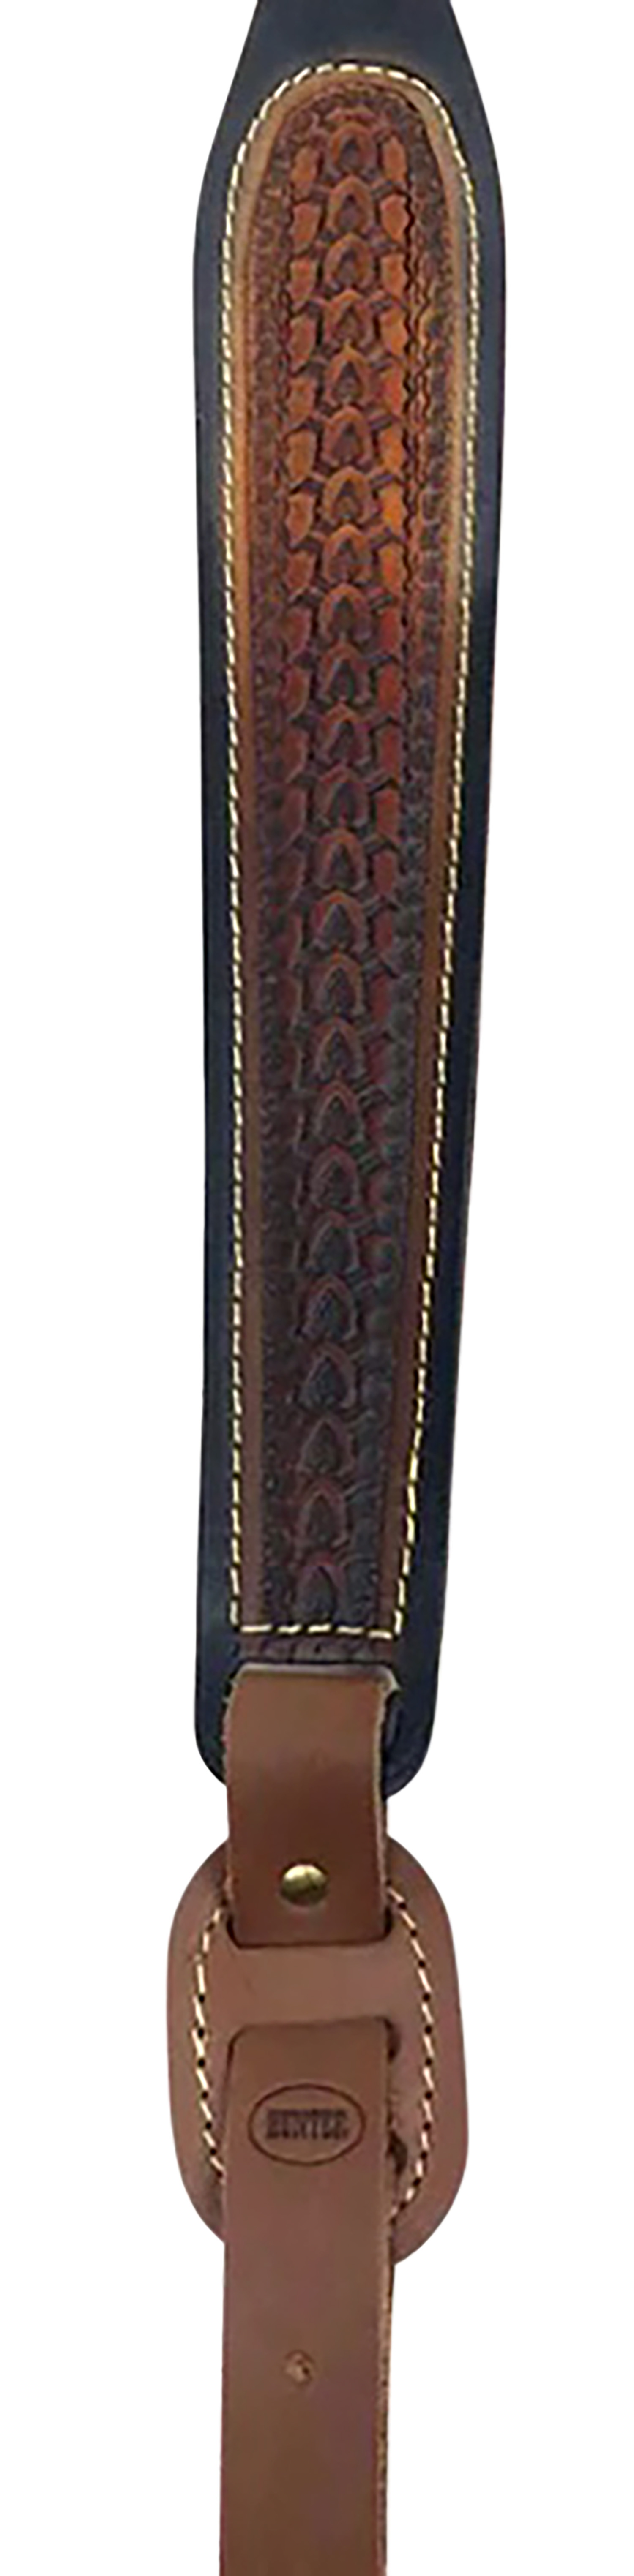 Hunter Company 027-139-3 Cobra  Chestnut Tan & Black Painted Leather/Suede with Embossed Design, Quick Adjust